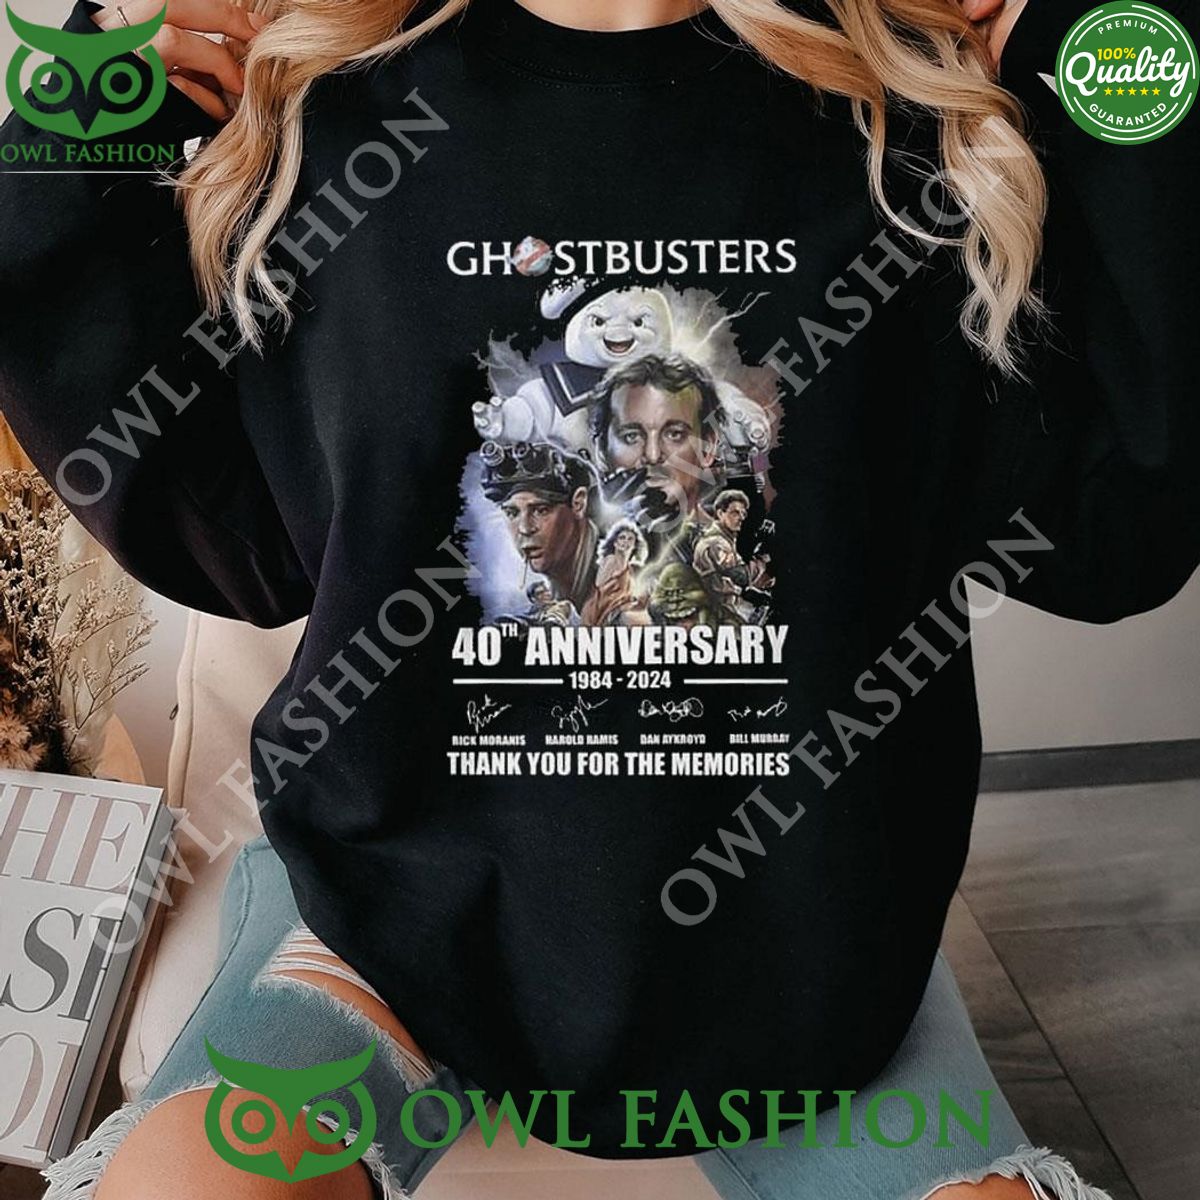 Ghostbusters 40th Anniversary 1984-2024 Thank You For The Memories Shirt Hoodie